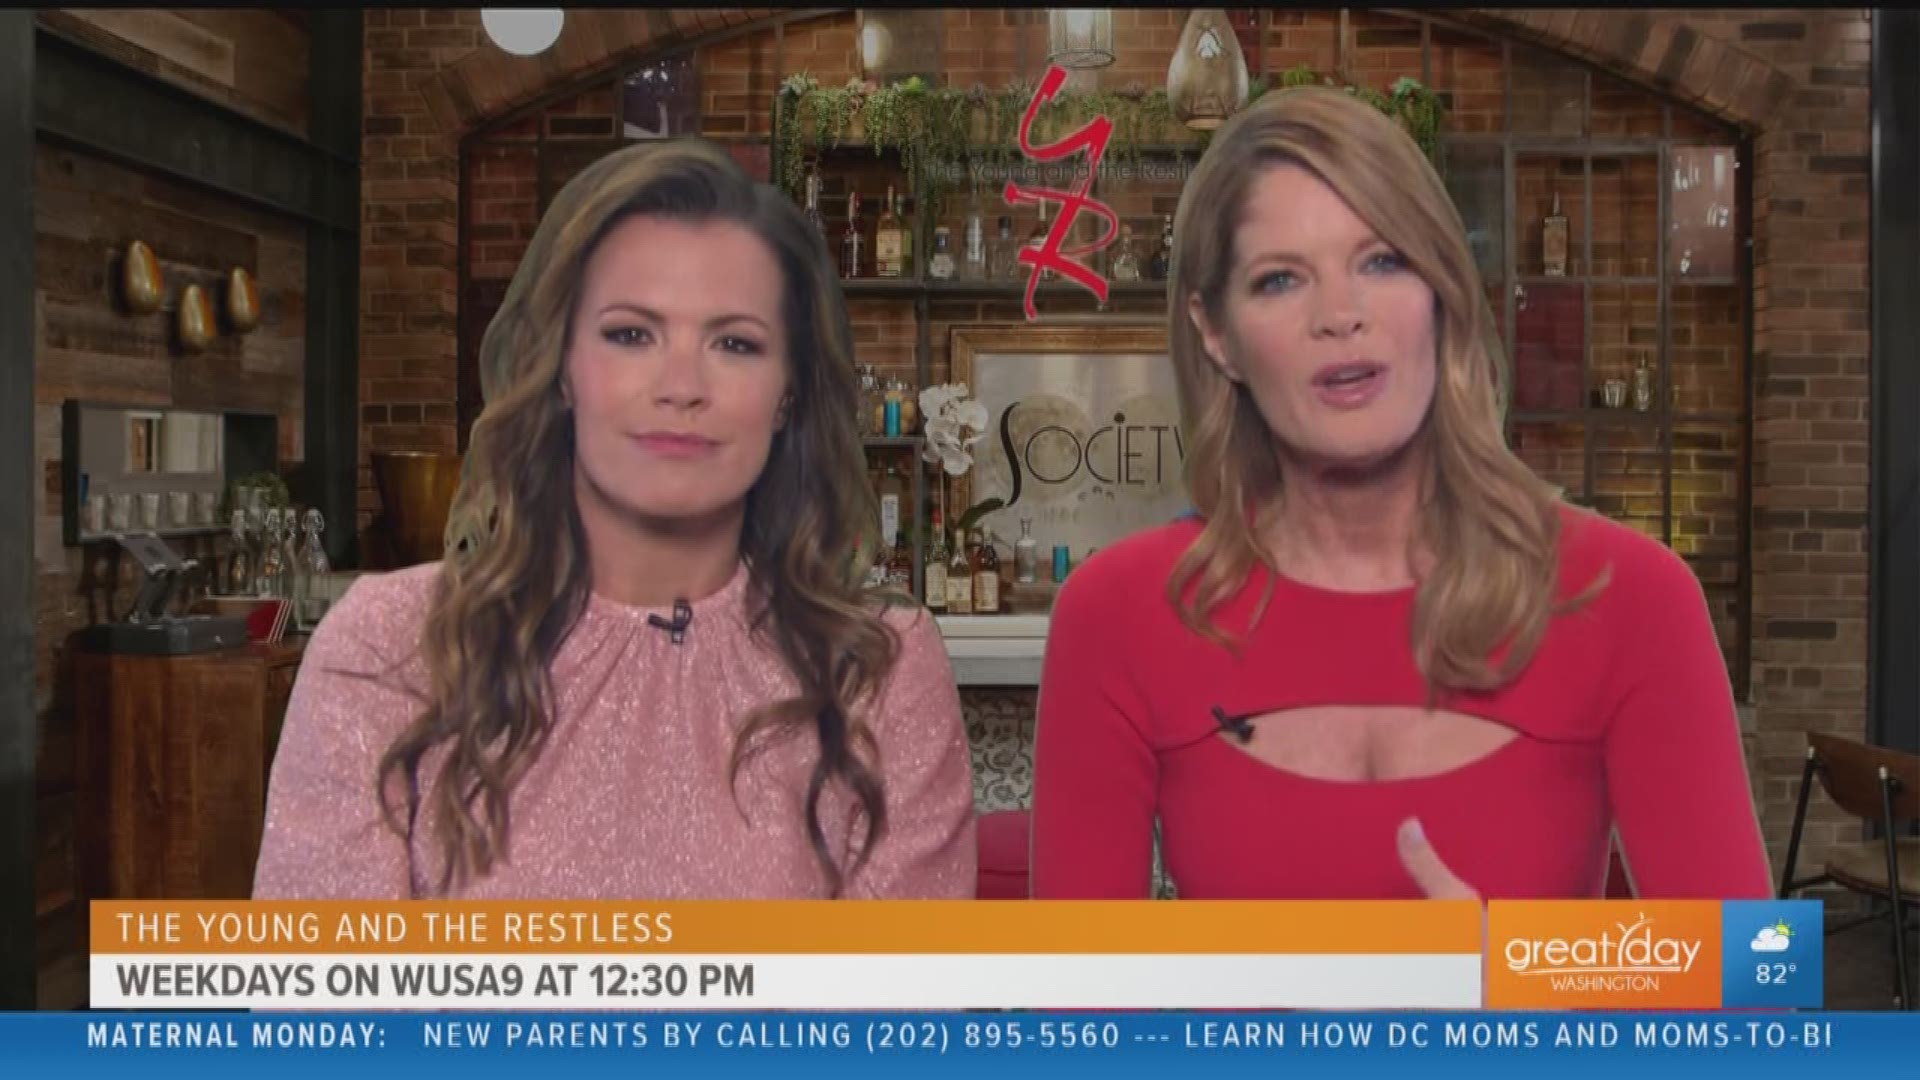 The drama never ends in Genoa City, 'The Young and The Restless' stars, Michelle Stafford and Melissa Claire Egan share what story line they'd like their characters to play, such as coming back from the dead or playing an evil twin. You can watch 'The Young and The Restless' weekdays on WUSA9 at 12:30 p.m.